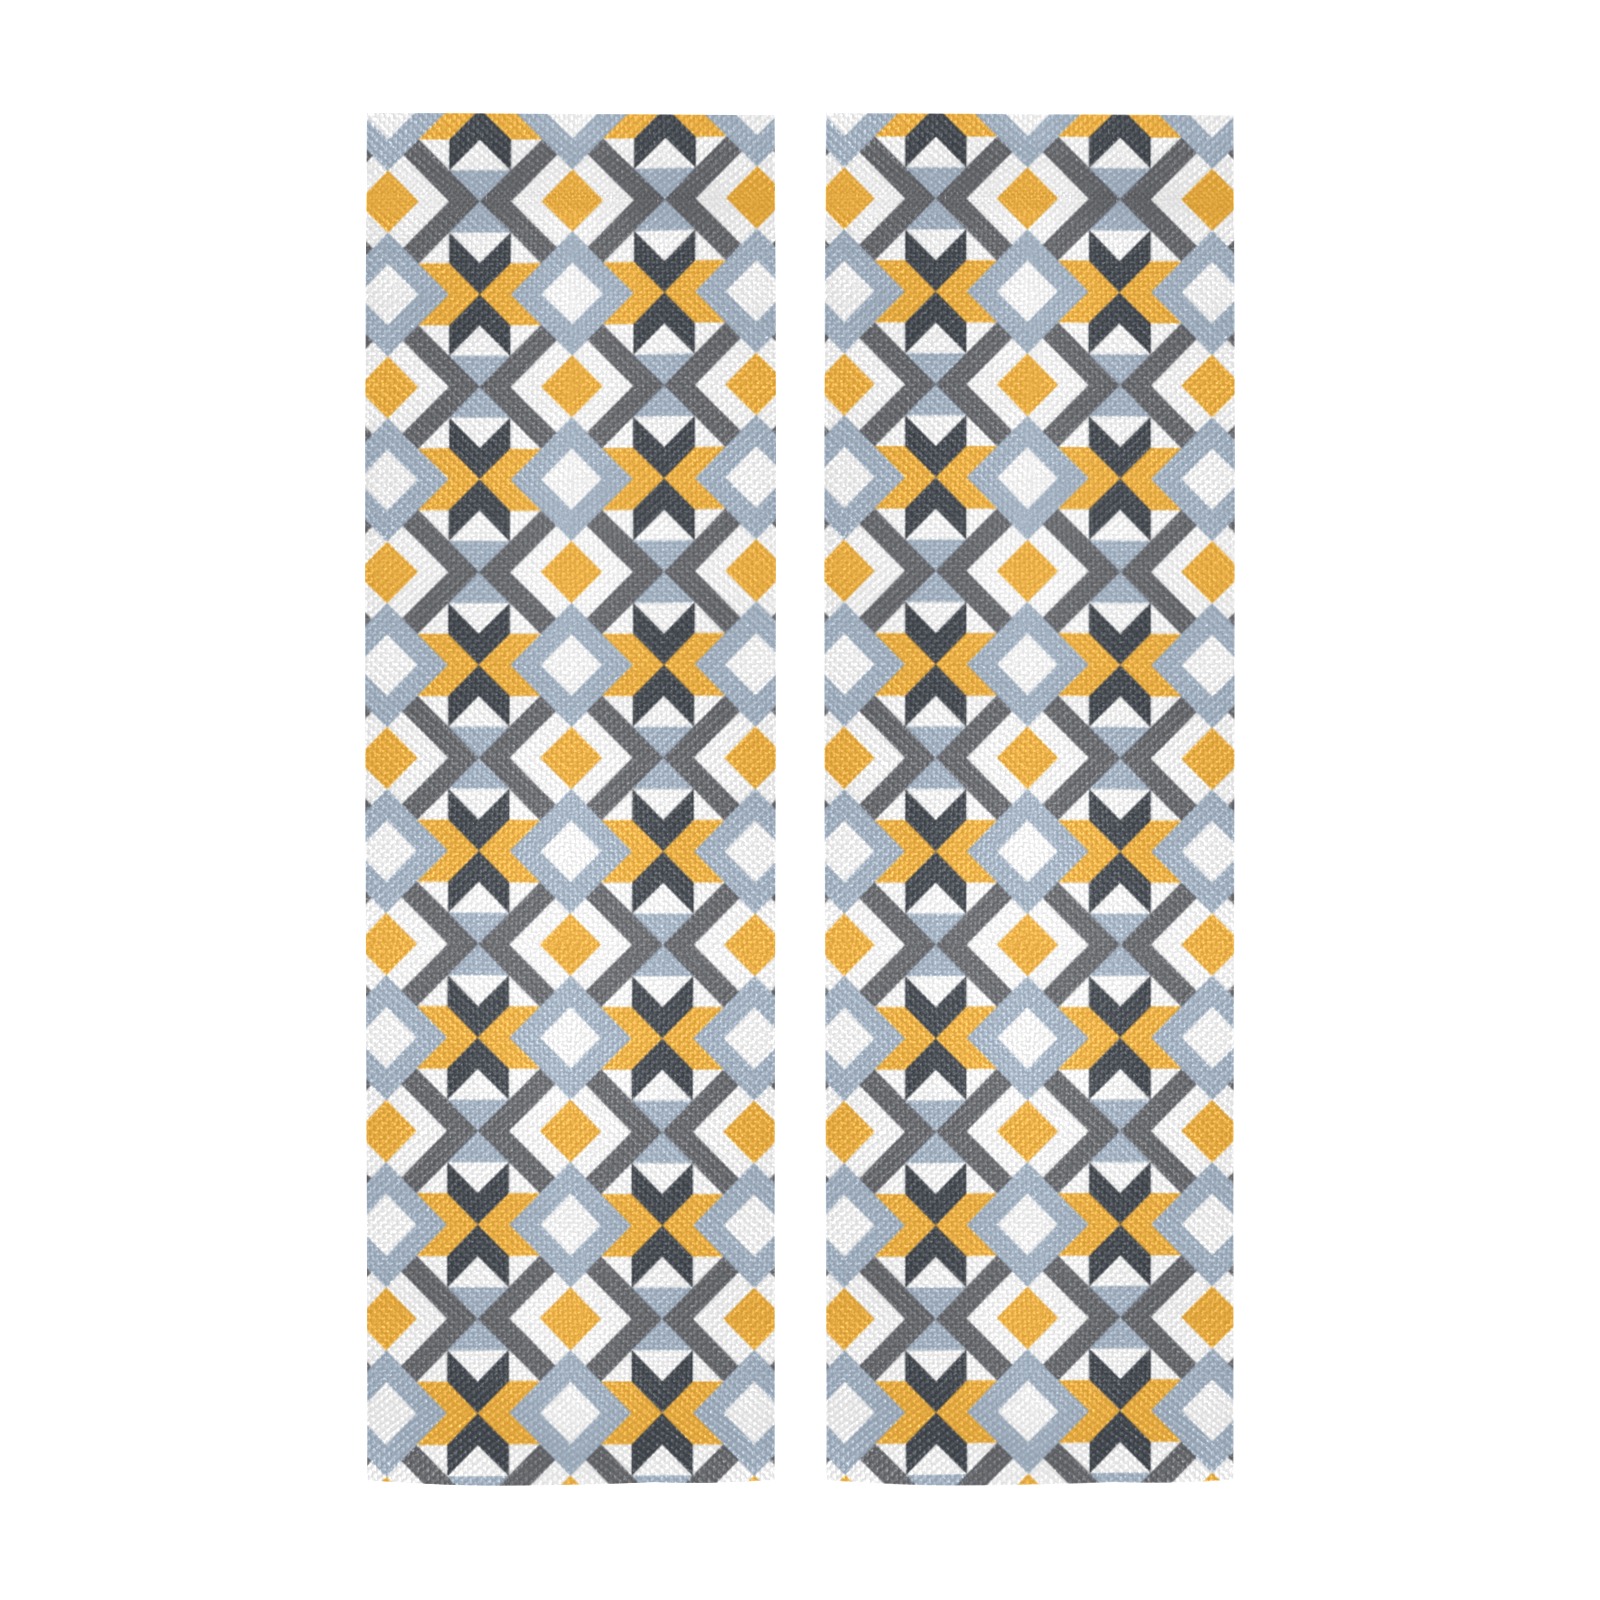 Retro Angles Abstract Geometric Pattern Door Curtain Tapestry